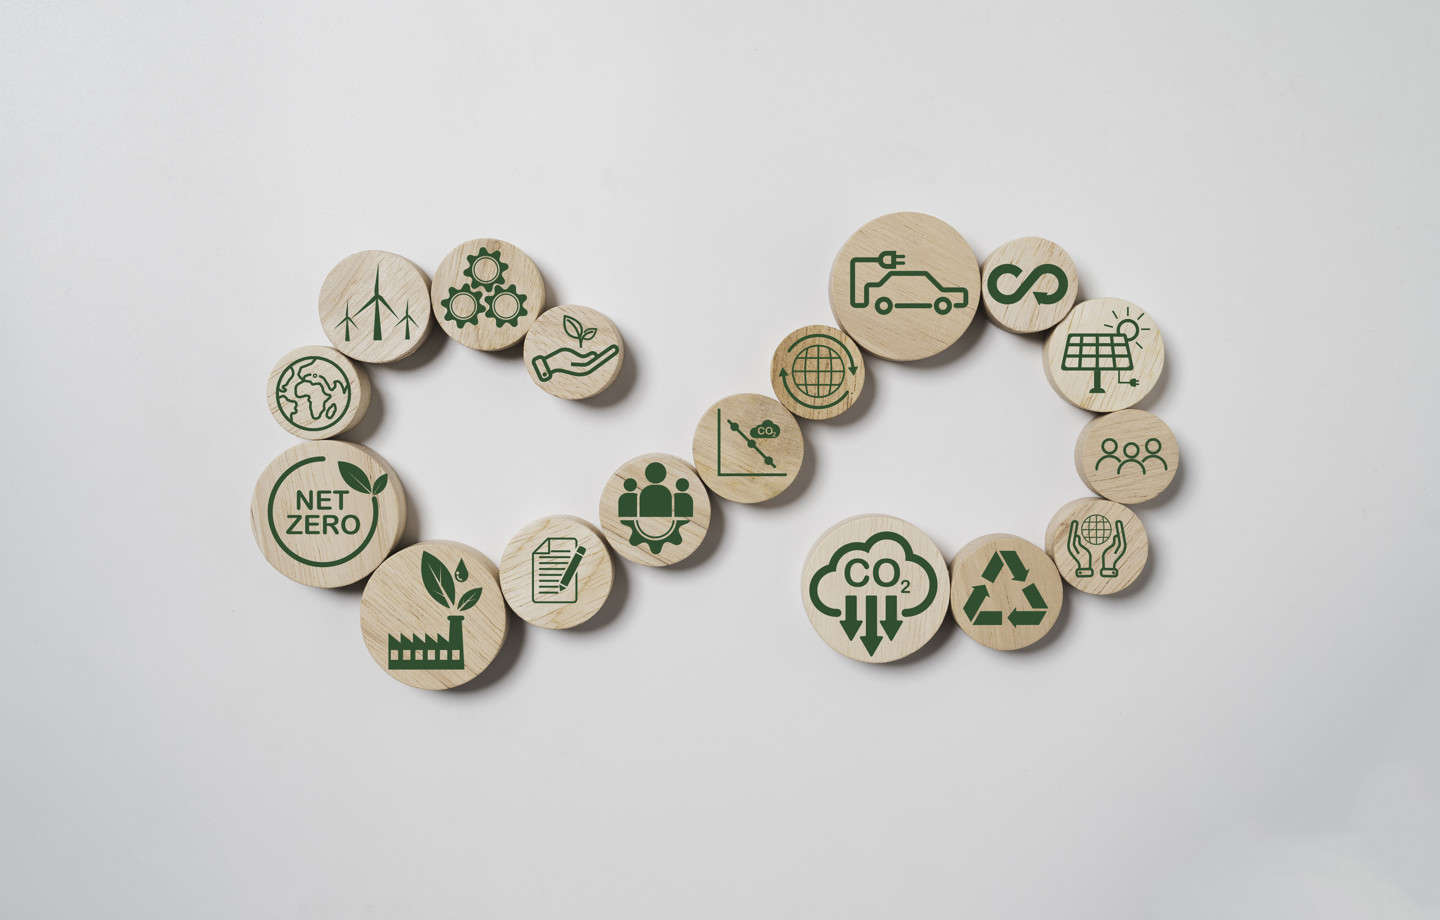 Wooden Infinity Shape With Circular Business Economy Environment Icons White Background Future Sustainable Investment Growth Reduce Environmental Pollution Concept